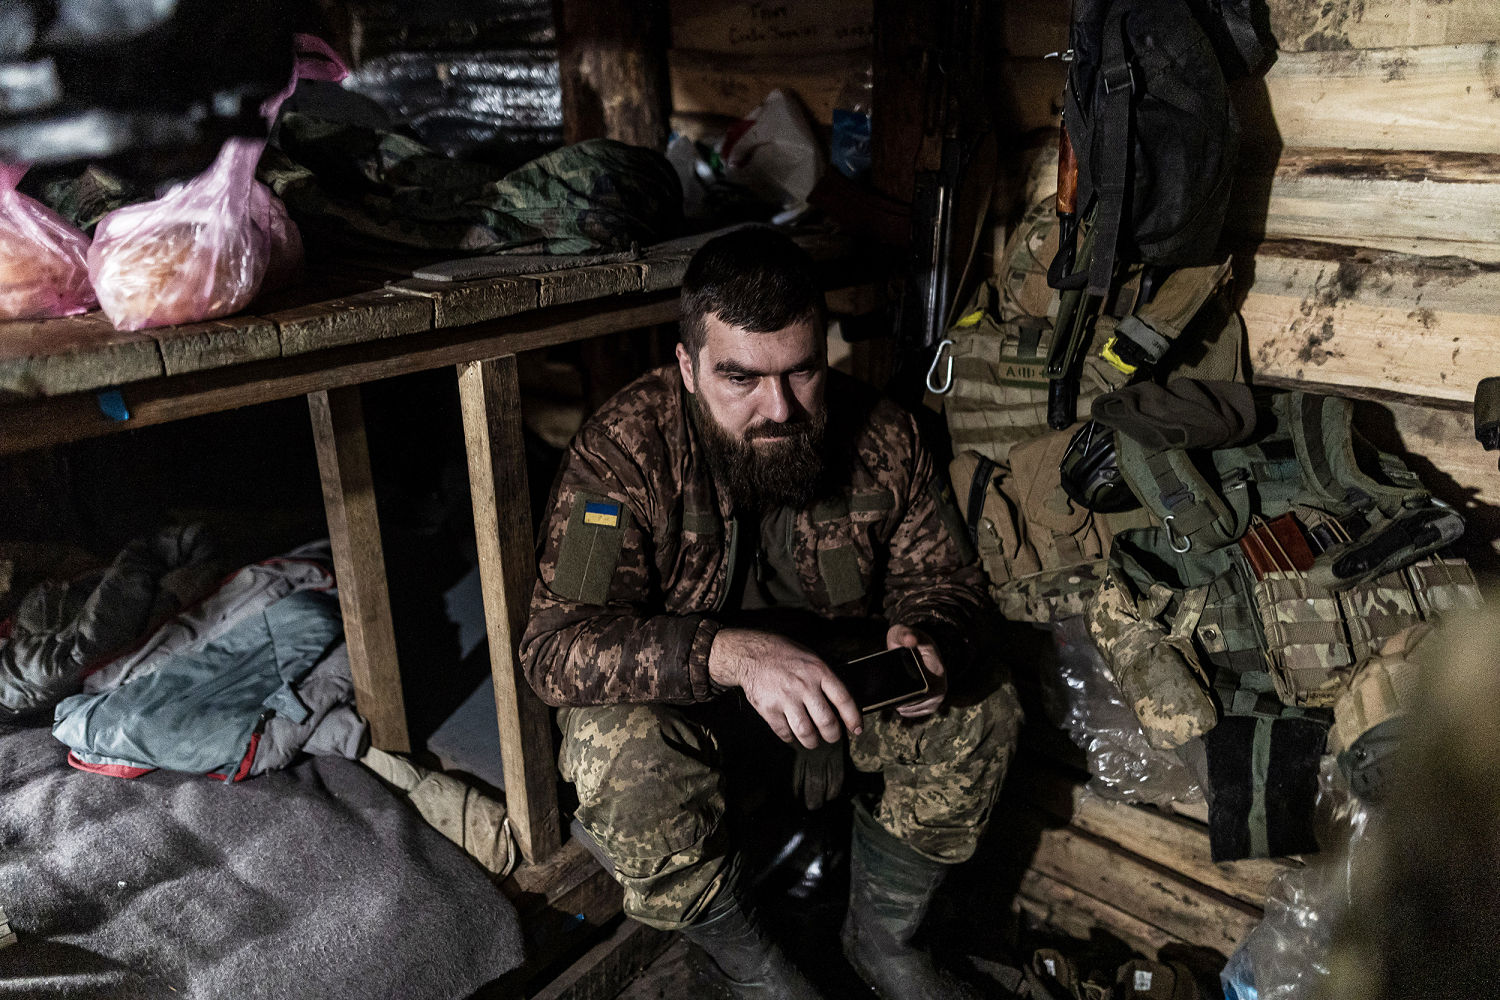 as russia pushes forward, ukrainian soldiers say u.s. aid delays have left them exposed